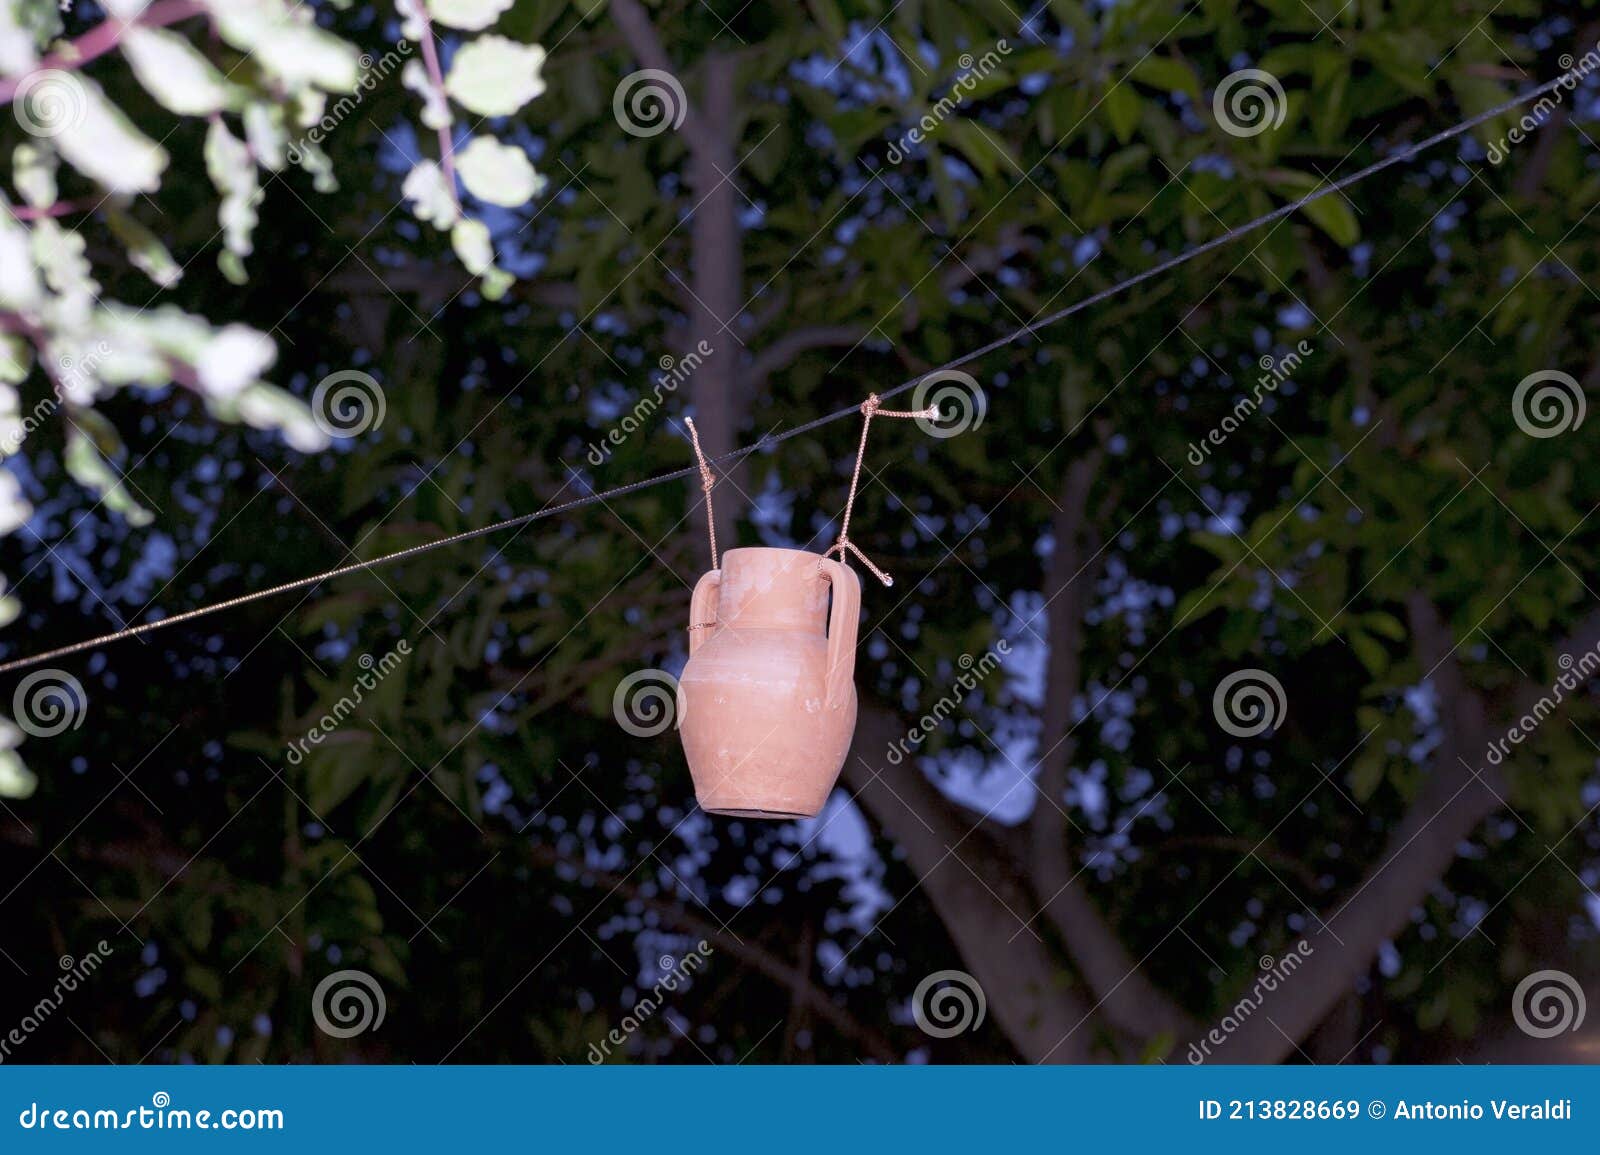 https://thumbs.dreamstime.com/z/pitcher-hanging-rope-garden-playful-one-clay-pots-to-break-pi%C3%B1ata-game-213828669.jpg